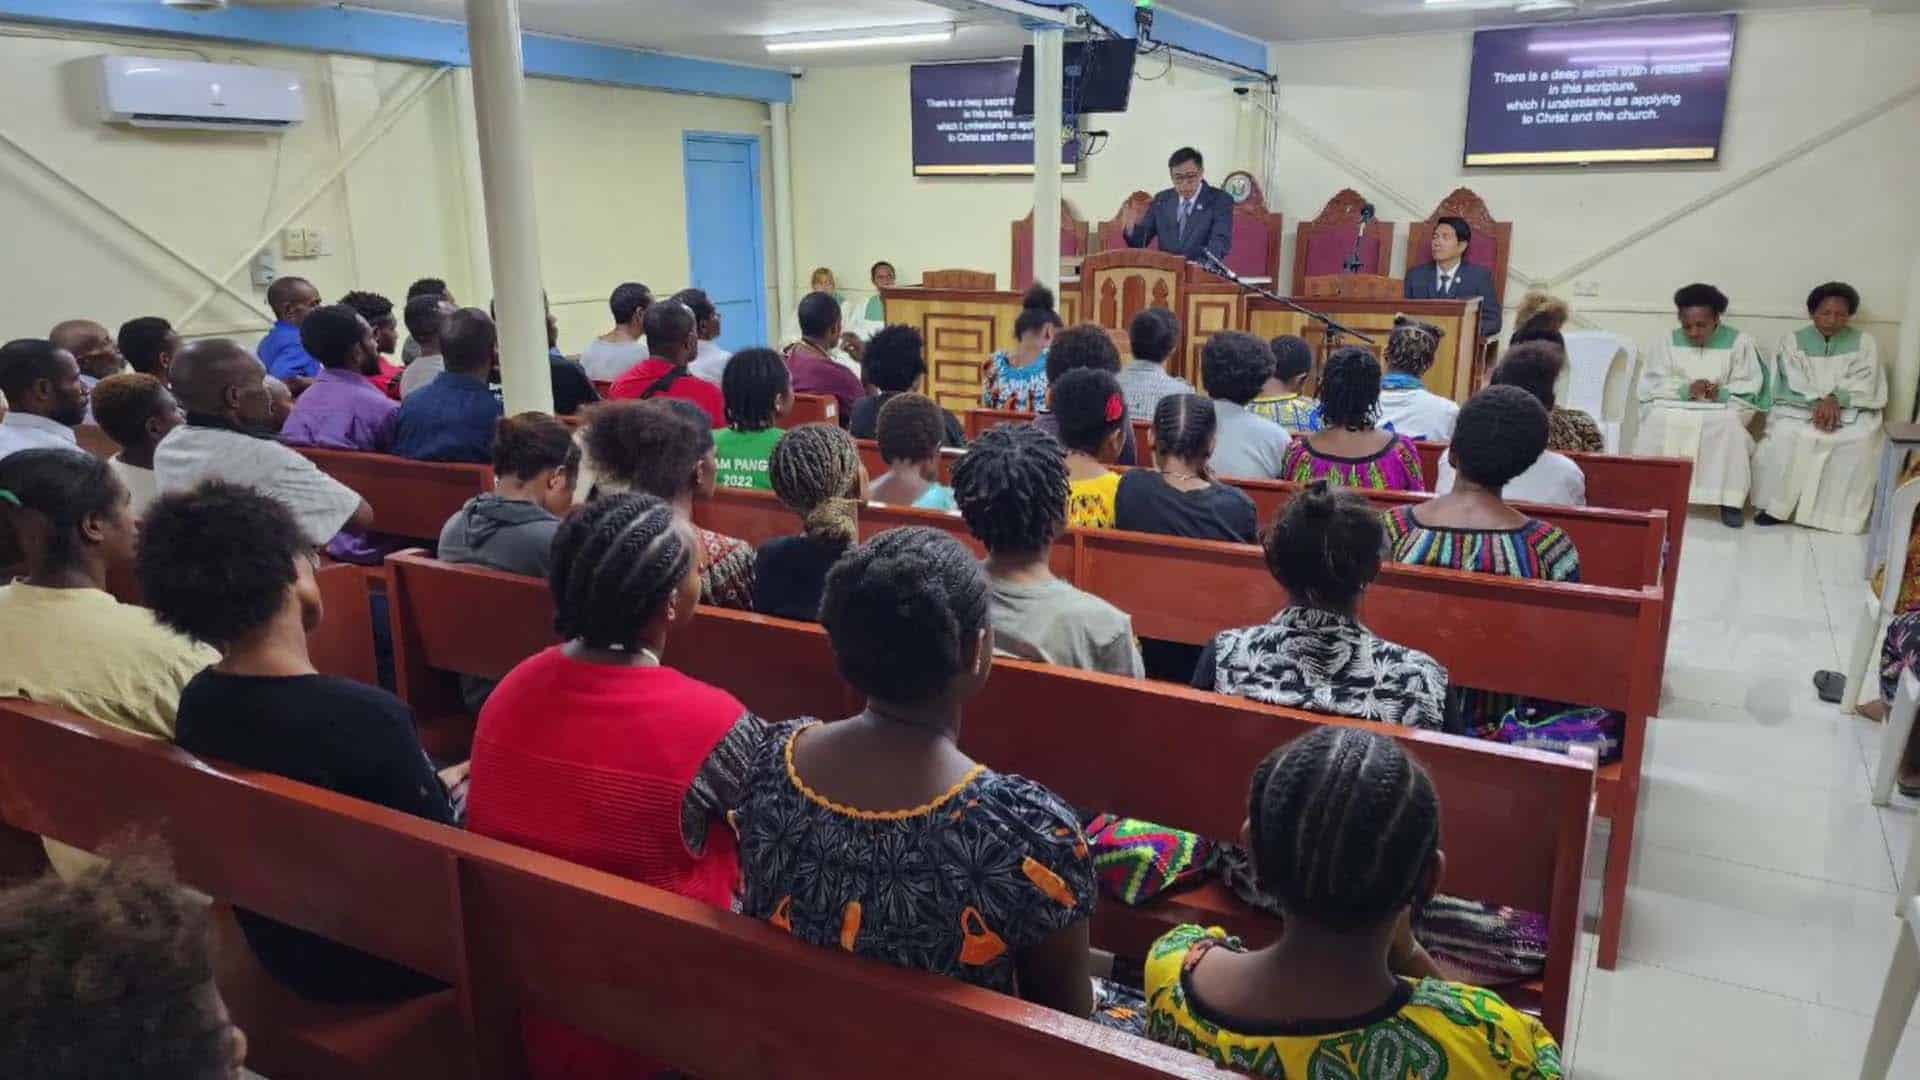 Evangelical mission in Lae City attracts guests, pastor